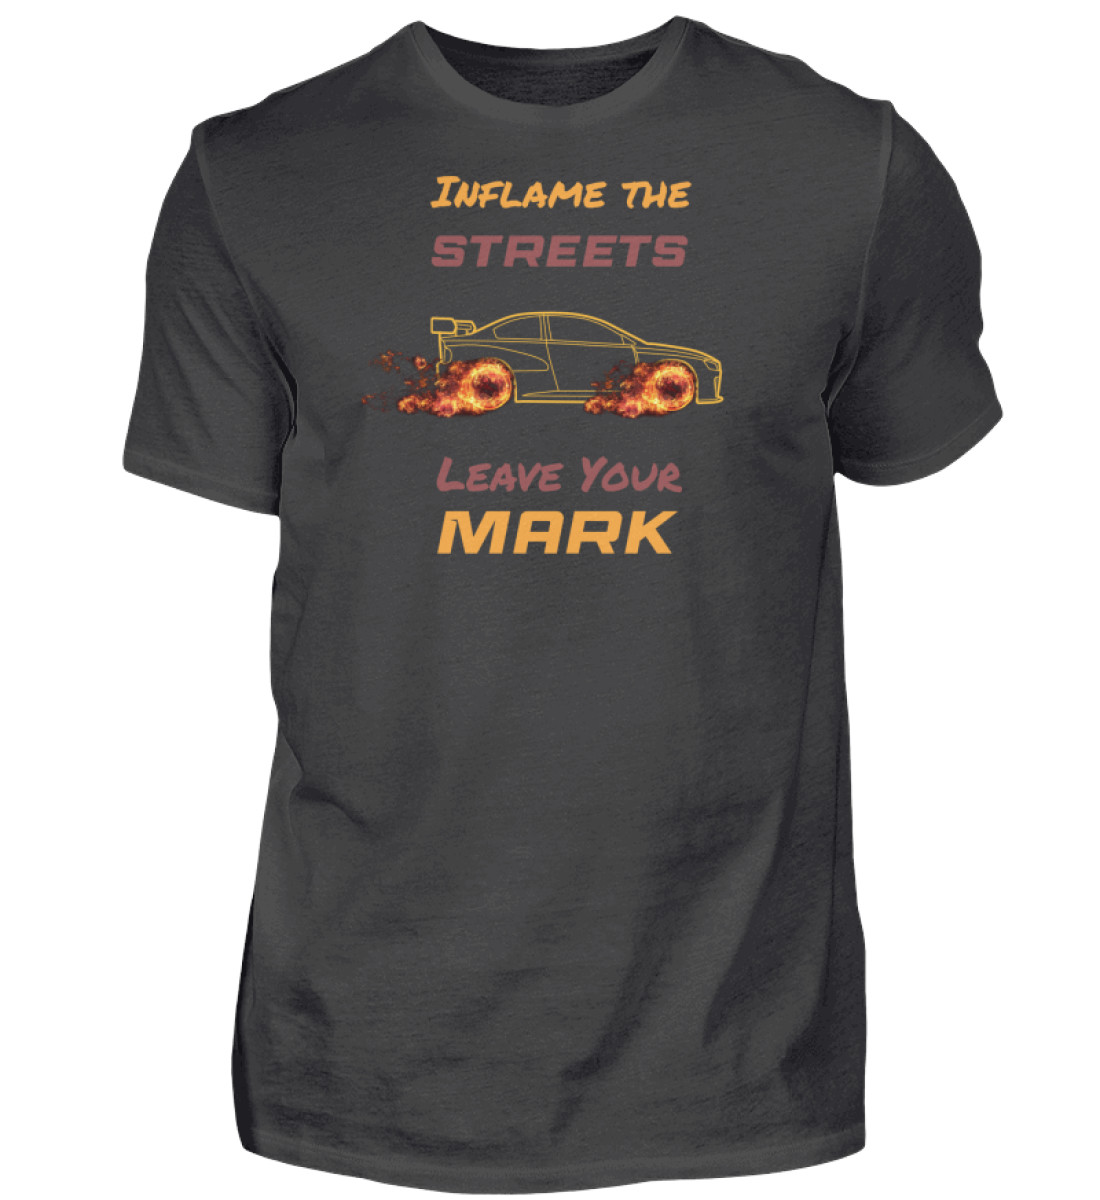 Inflame the Streets, Leave Your Mark! - Herren Premiumshirt-2989